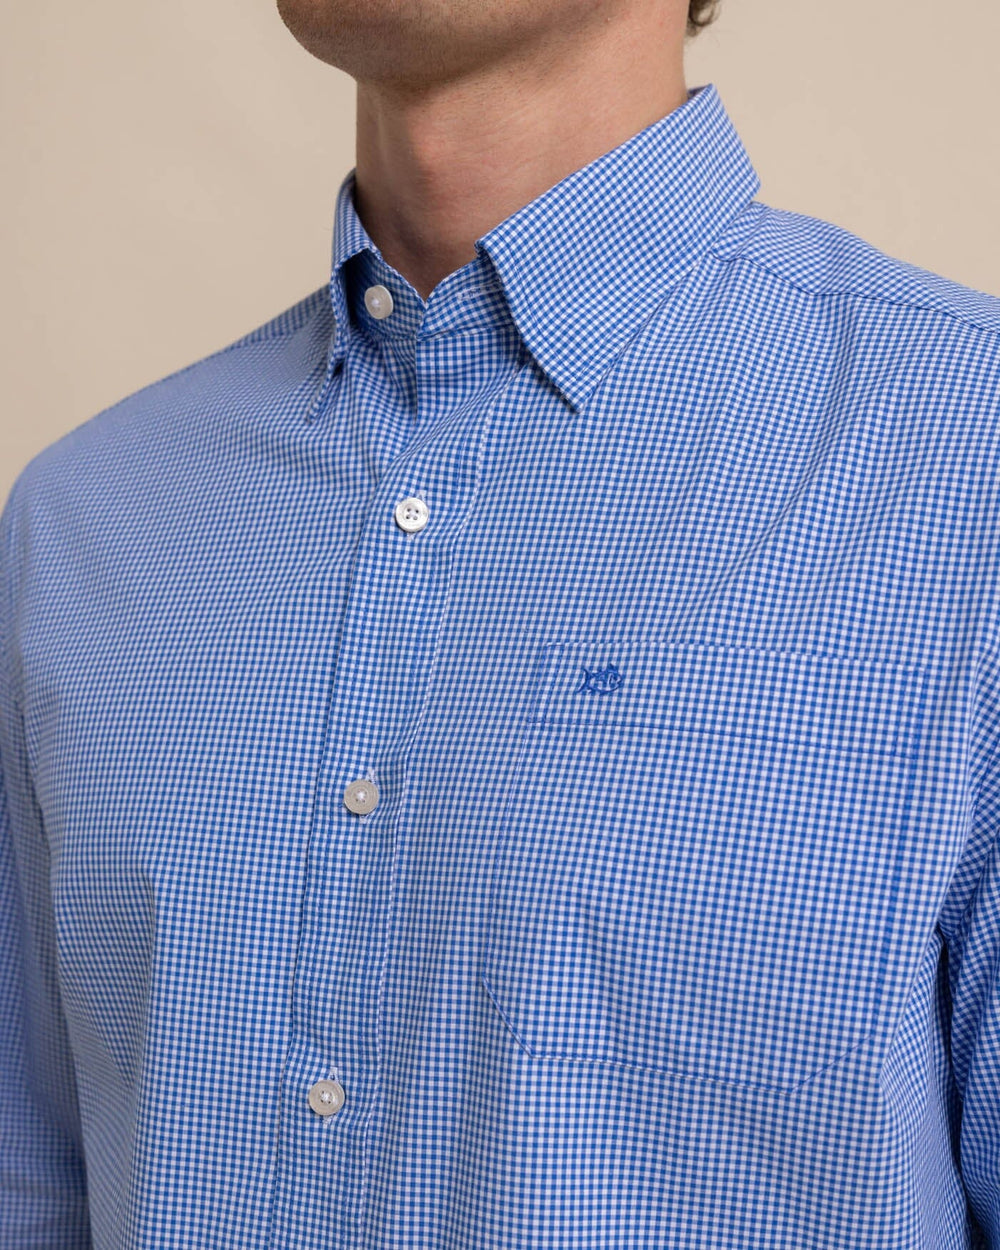 The detail view of the Southern Tide Charleston Parkwood Microgingham Long Sleeve Sport Shirt by Southern Tide - Cobalt Blue